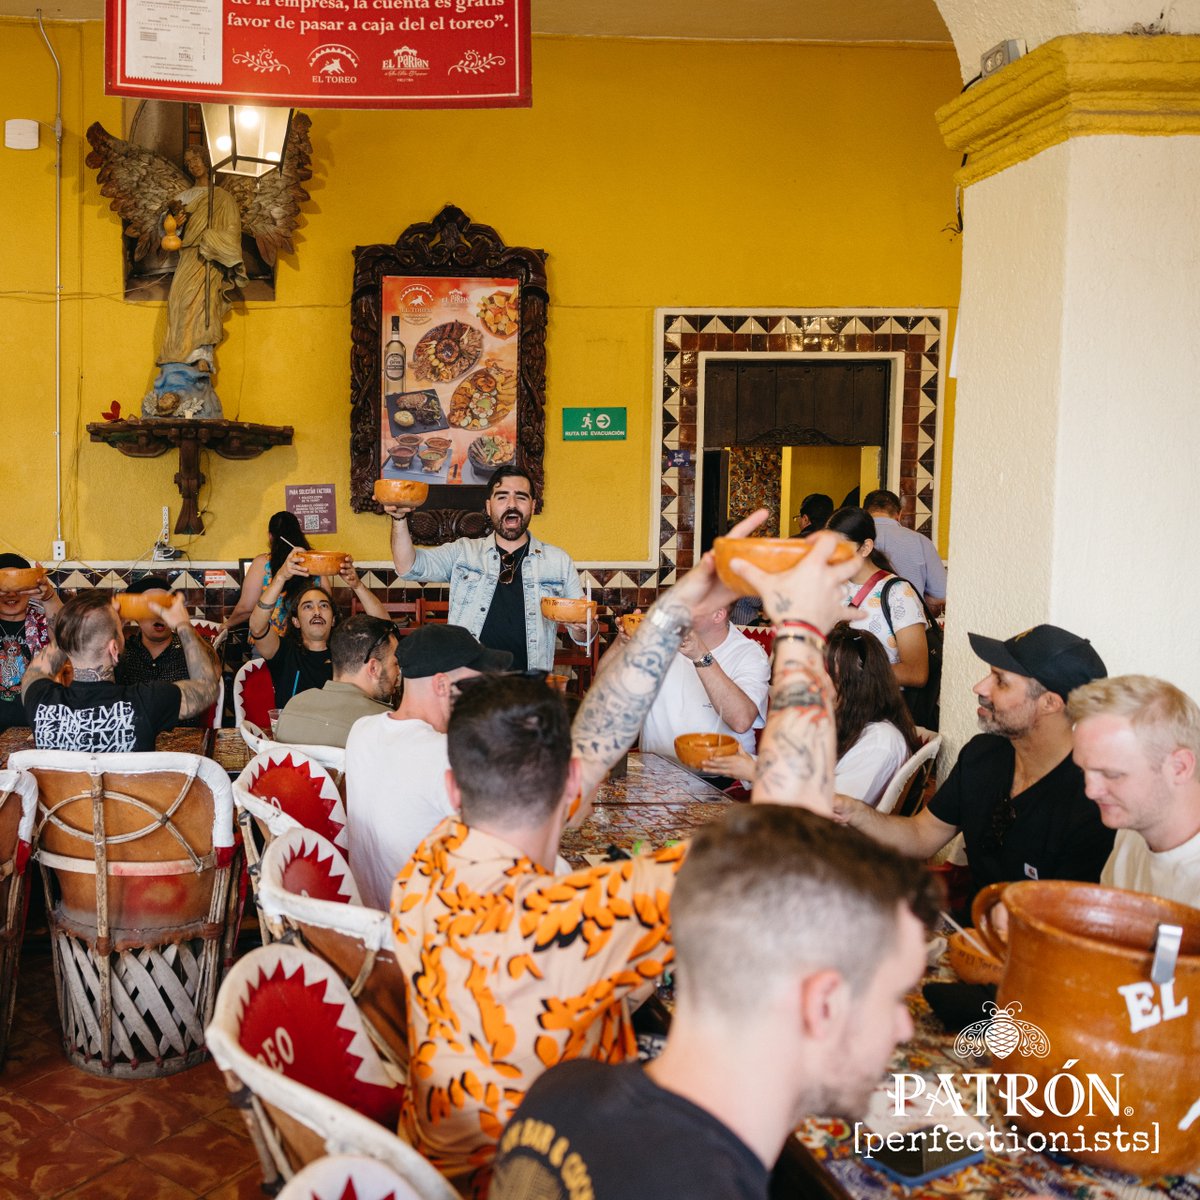 The #patronperfectionists have arrived! It felt as though the sun over Mexico burned brighter, filled with the formings of fast friendships and the anticipation of what this week unlike any other will bring. #patrontequila #mixologiademexico #ourhands #bartending